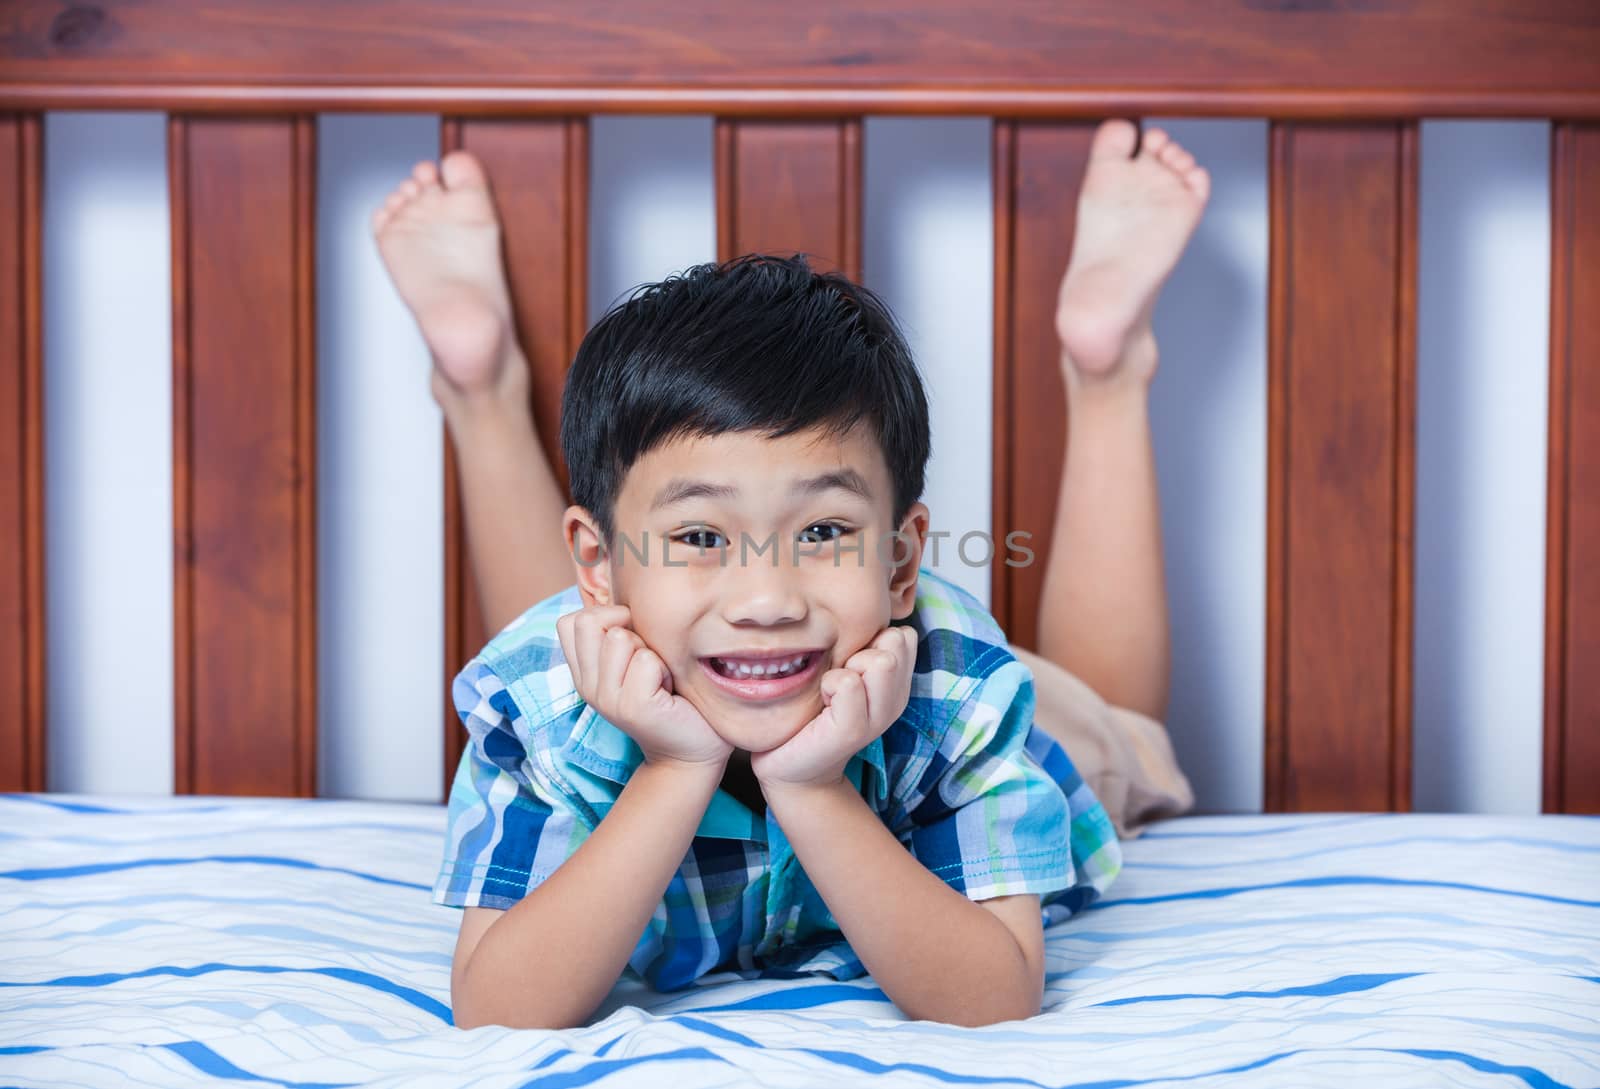 Handsome asian boy with  teeth smile and looking at camera. Lovely child propping up his face and lying barefoot on bed in bedroom.